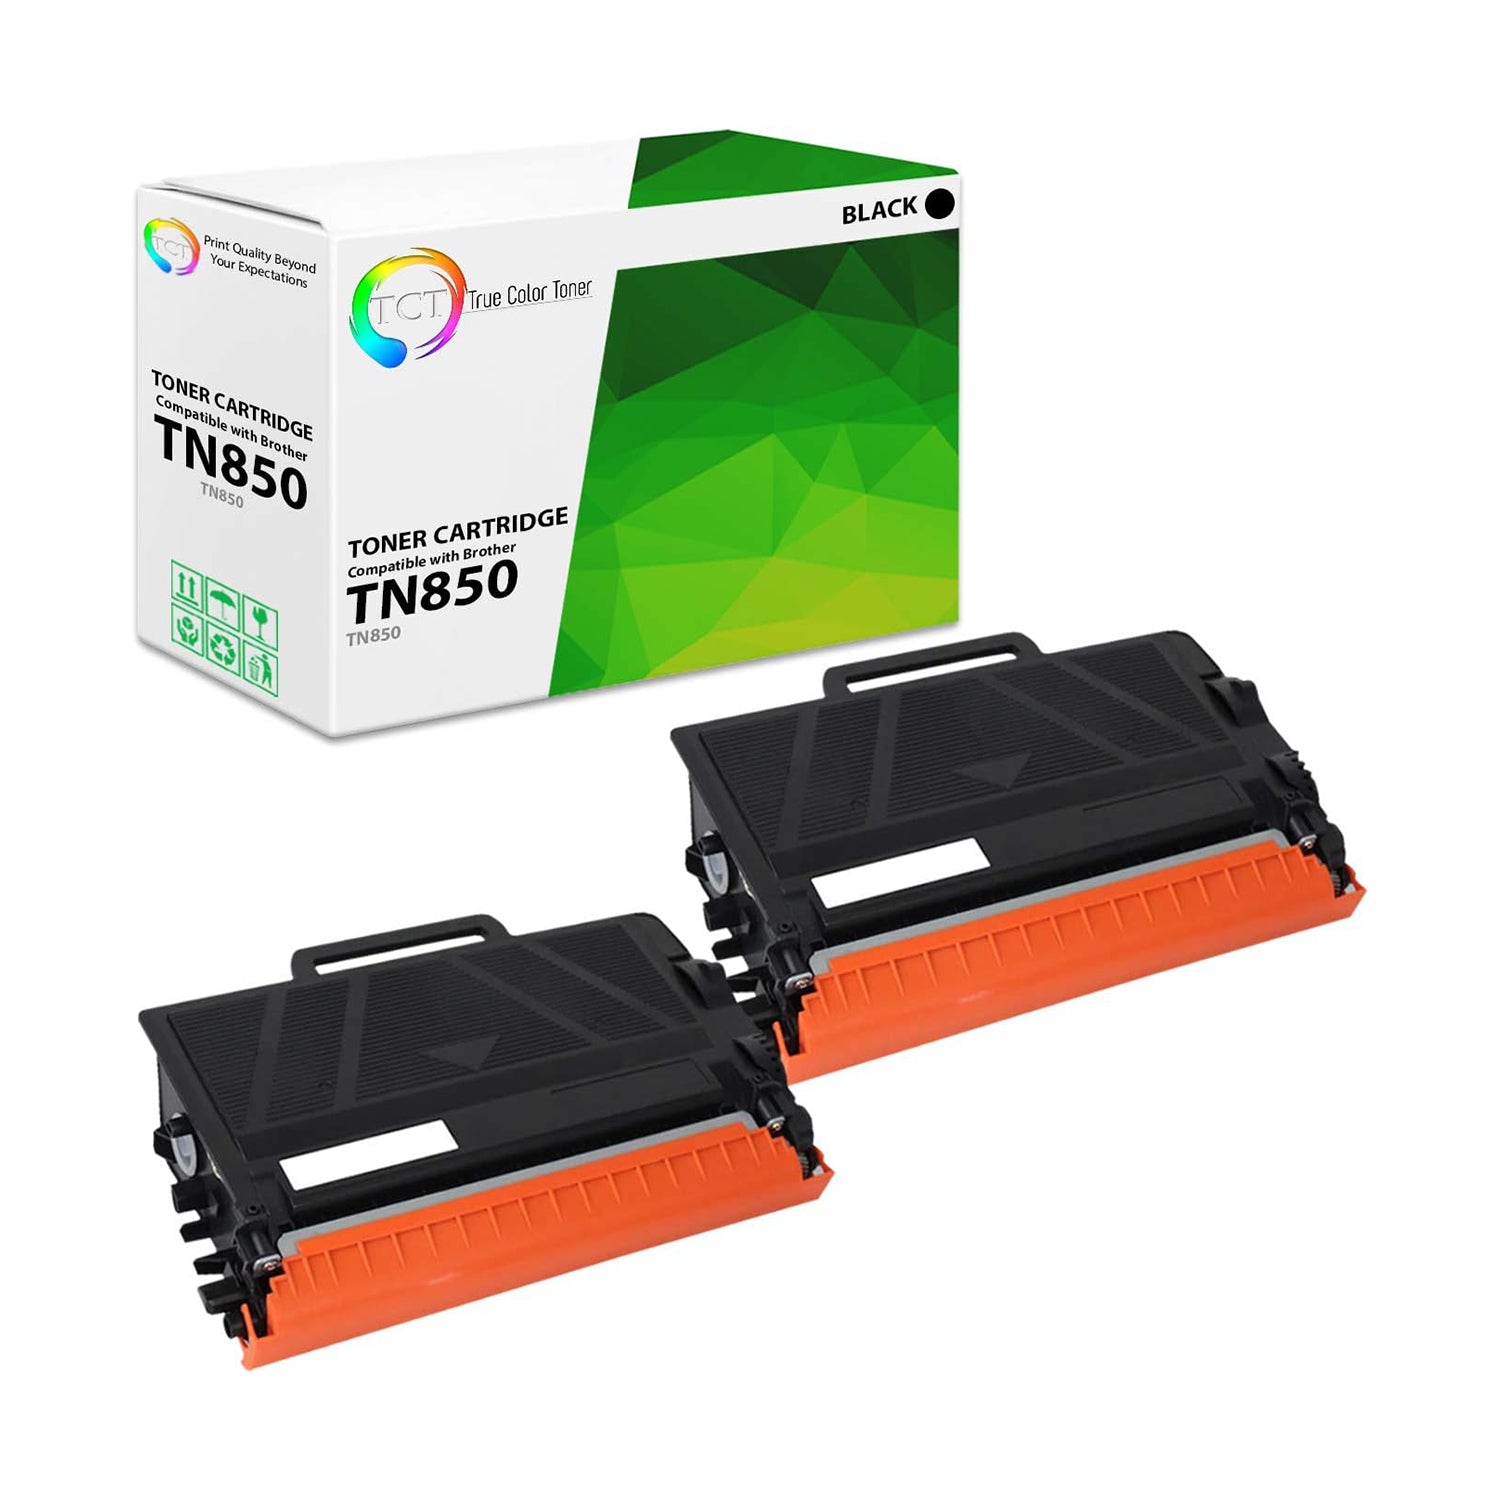 TCT Compatible High Yield Toner Cartridge Replacement for the Brother TN850 Series - 2 Pack Black